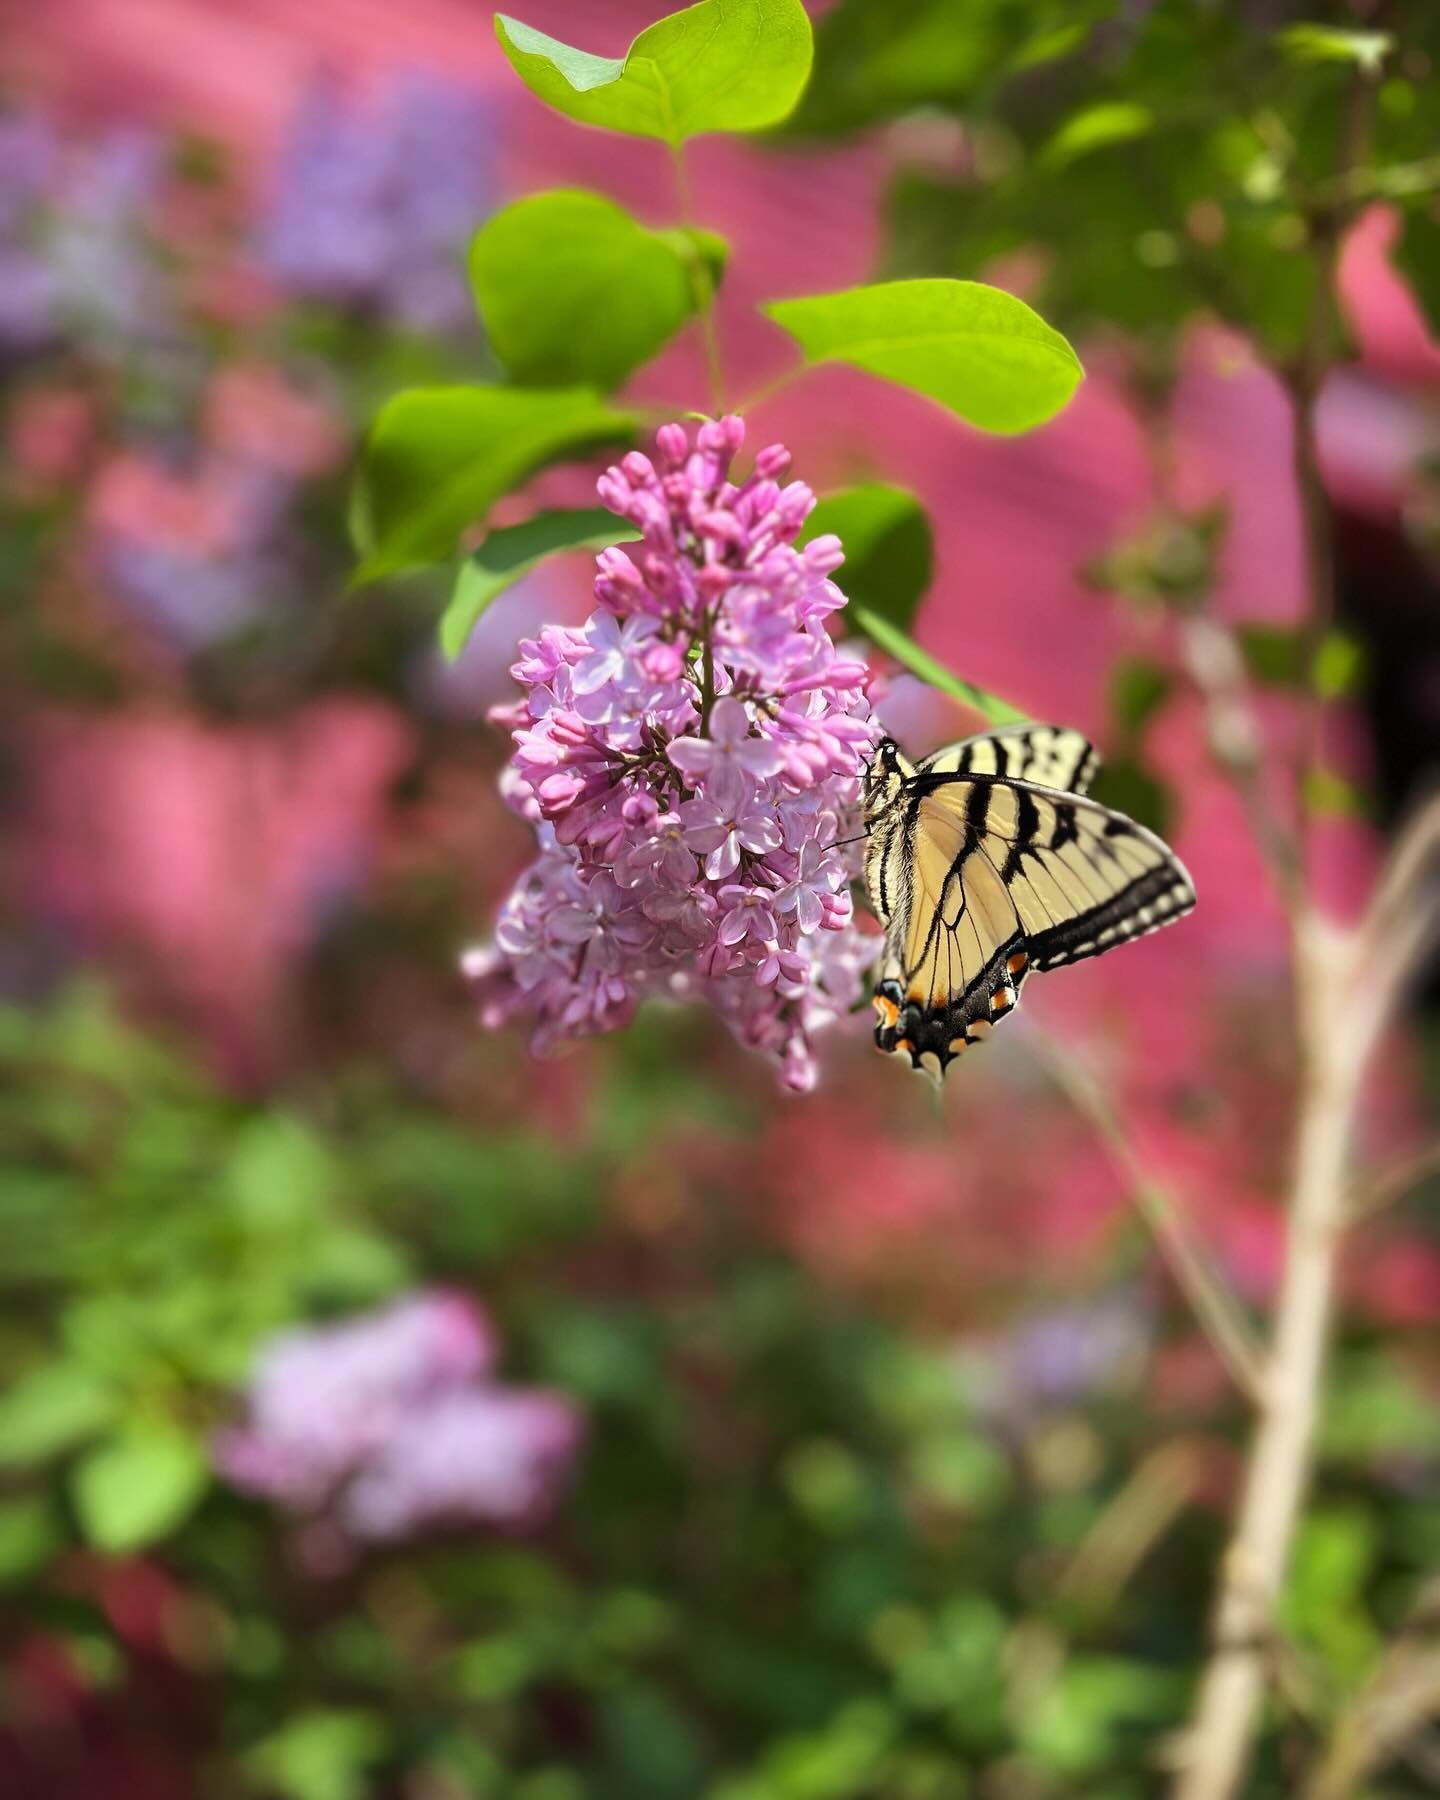 A yellow monarch butterfly grazes on blooming lilacs at Cultivate Care Farms in Bolton, MA, signaling spring&rsquo;s arrival. #CultivateCareFarms #BoltonMA #FarmBasedTherapy